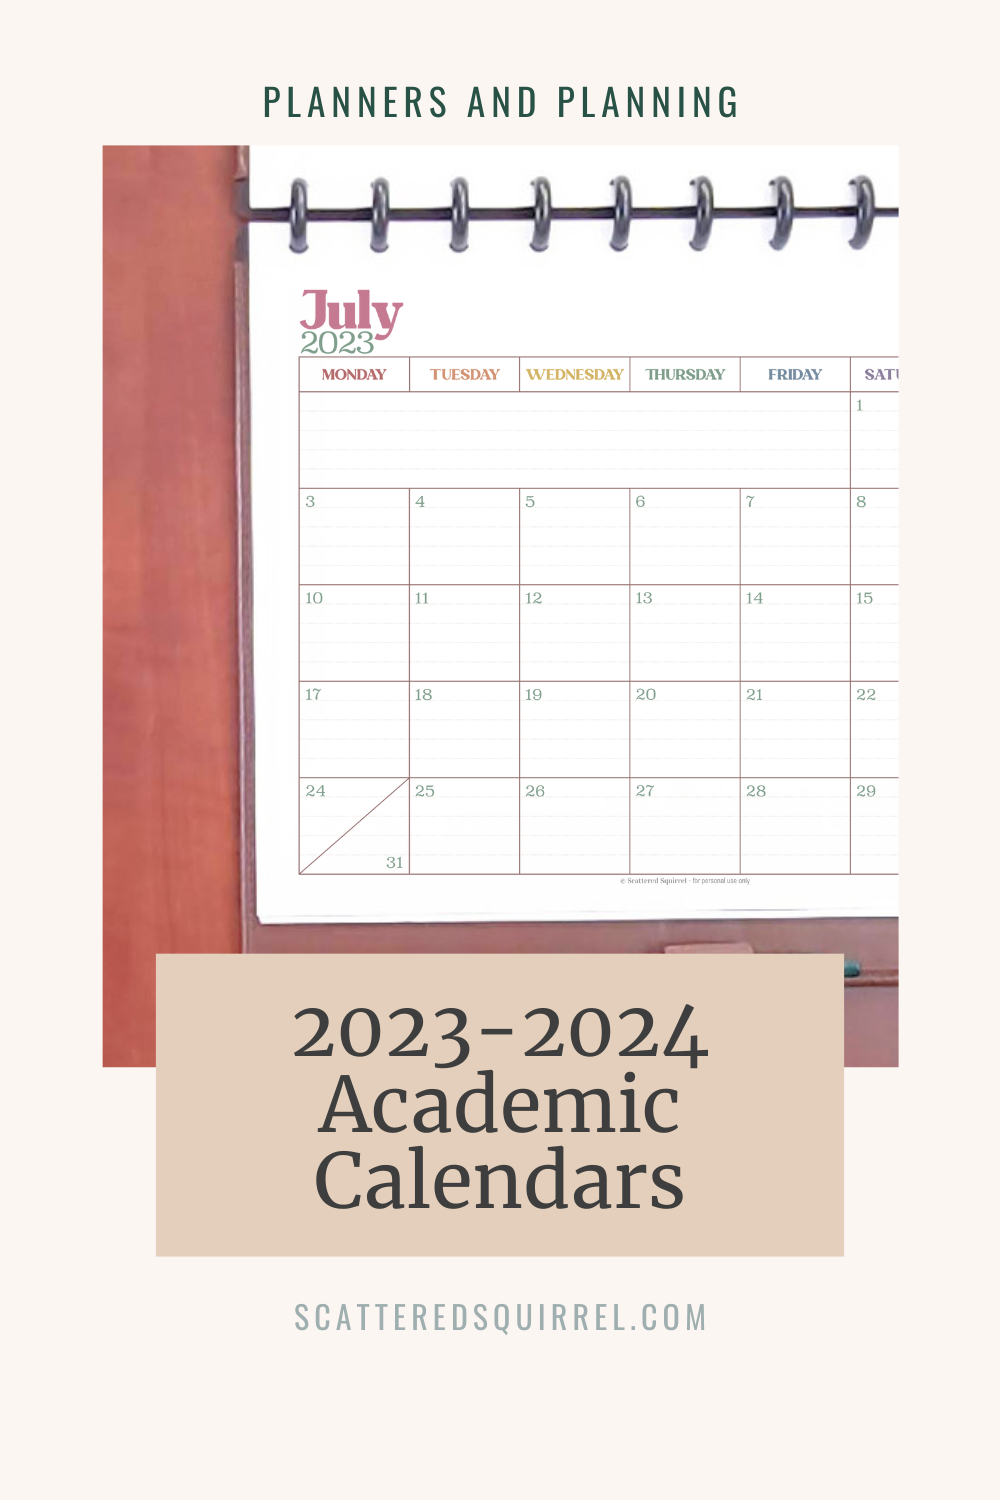 Free Printable Academic Calendars - Scattered Squirrel | Free Printable Academic Calendar 2023 2024